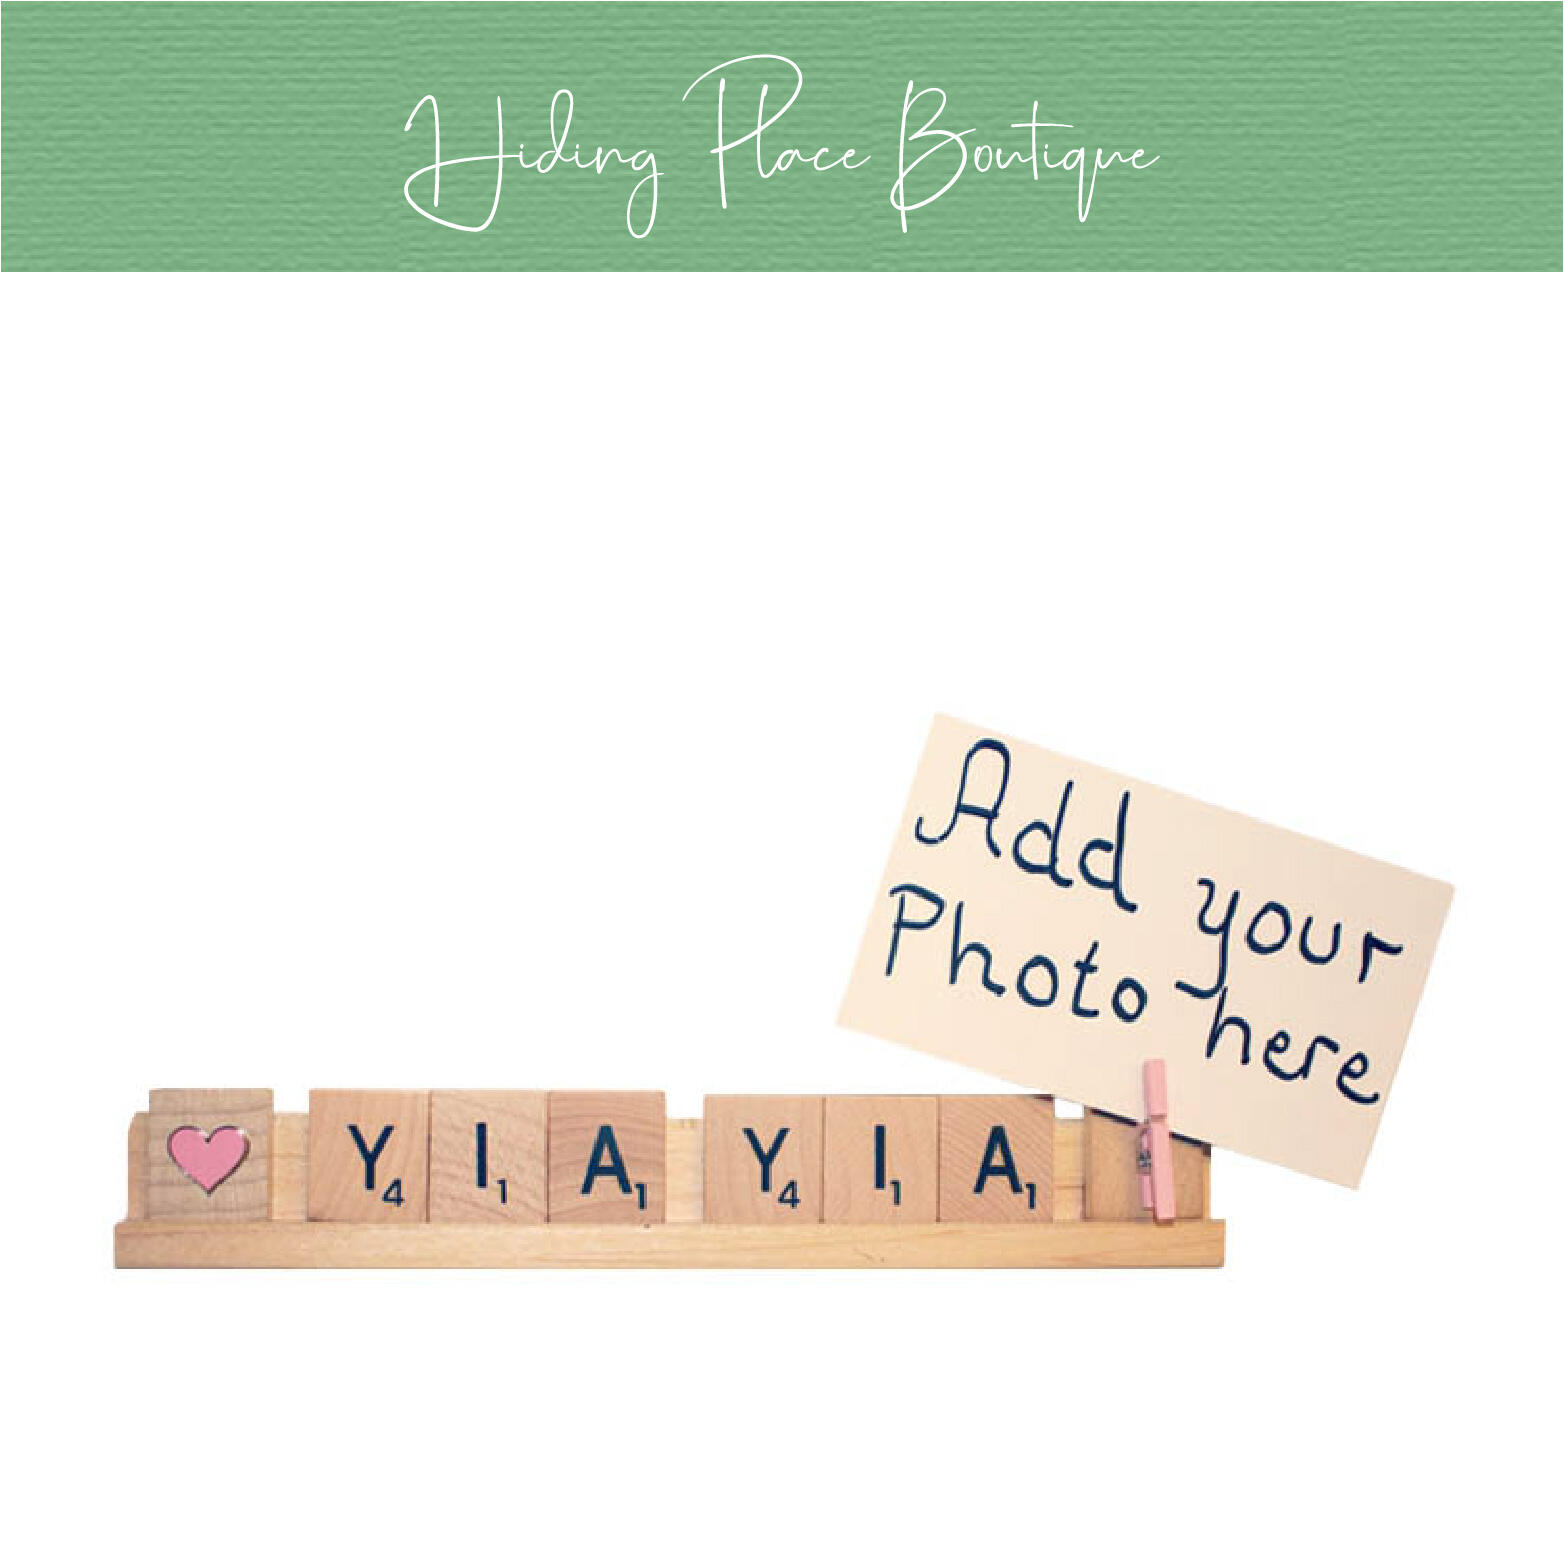 yia yia photo frame by hiding place boutique